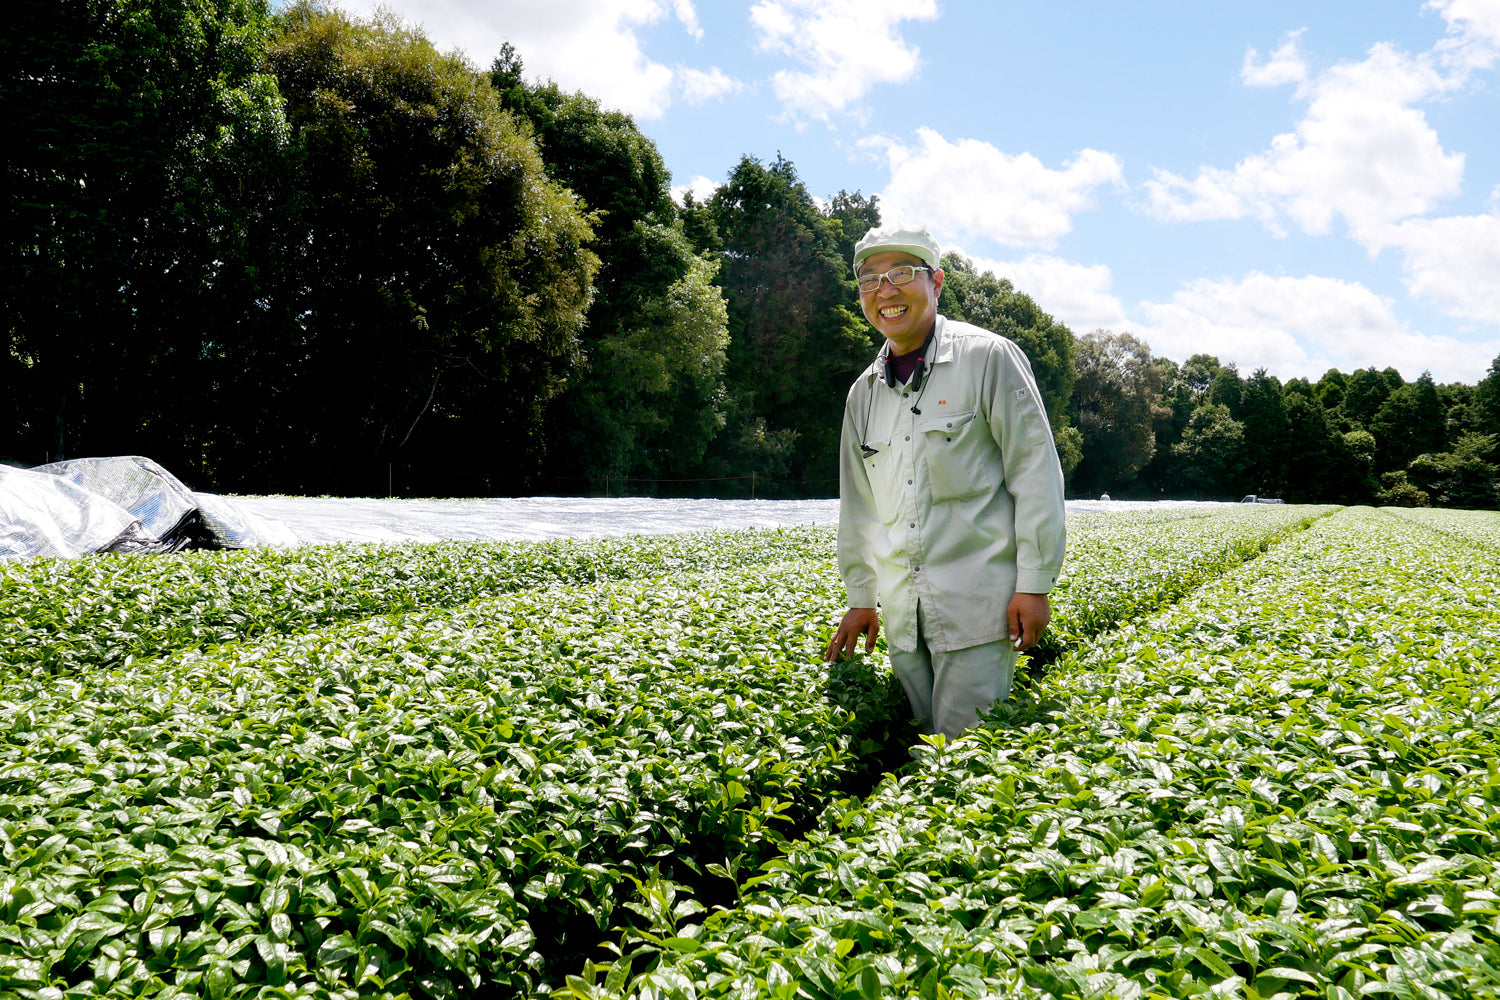 A smiling farmer stands between rows of bright green tea plants, his hand gently brushing the top of a plant.